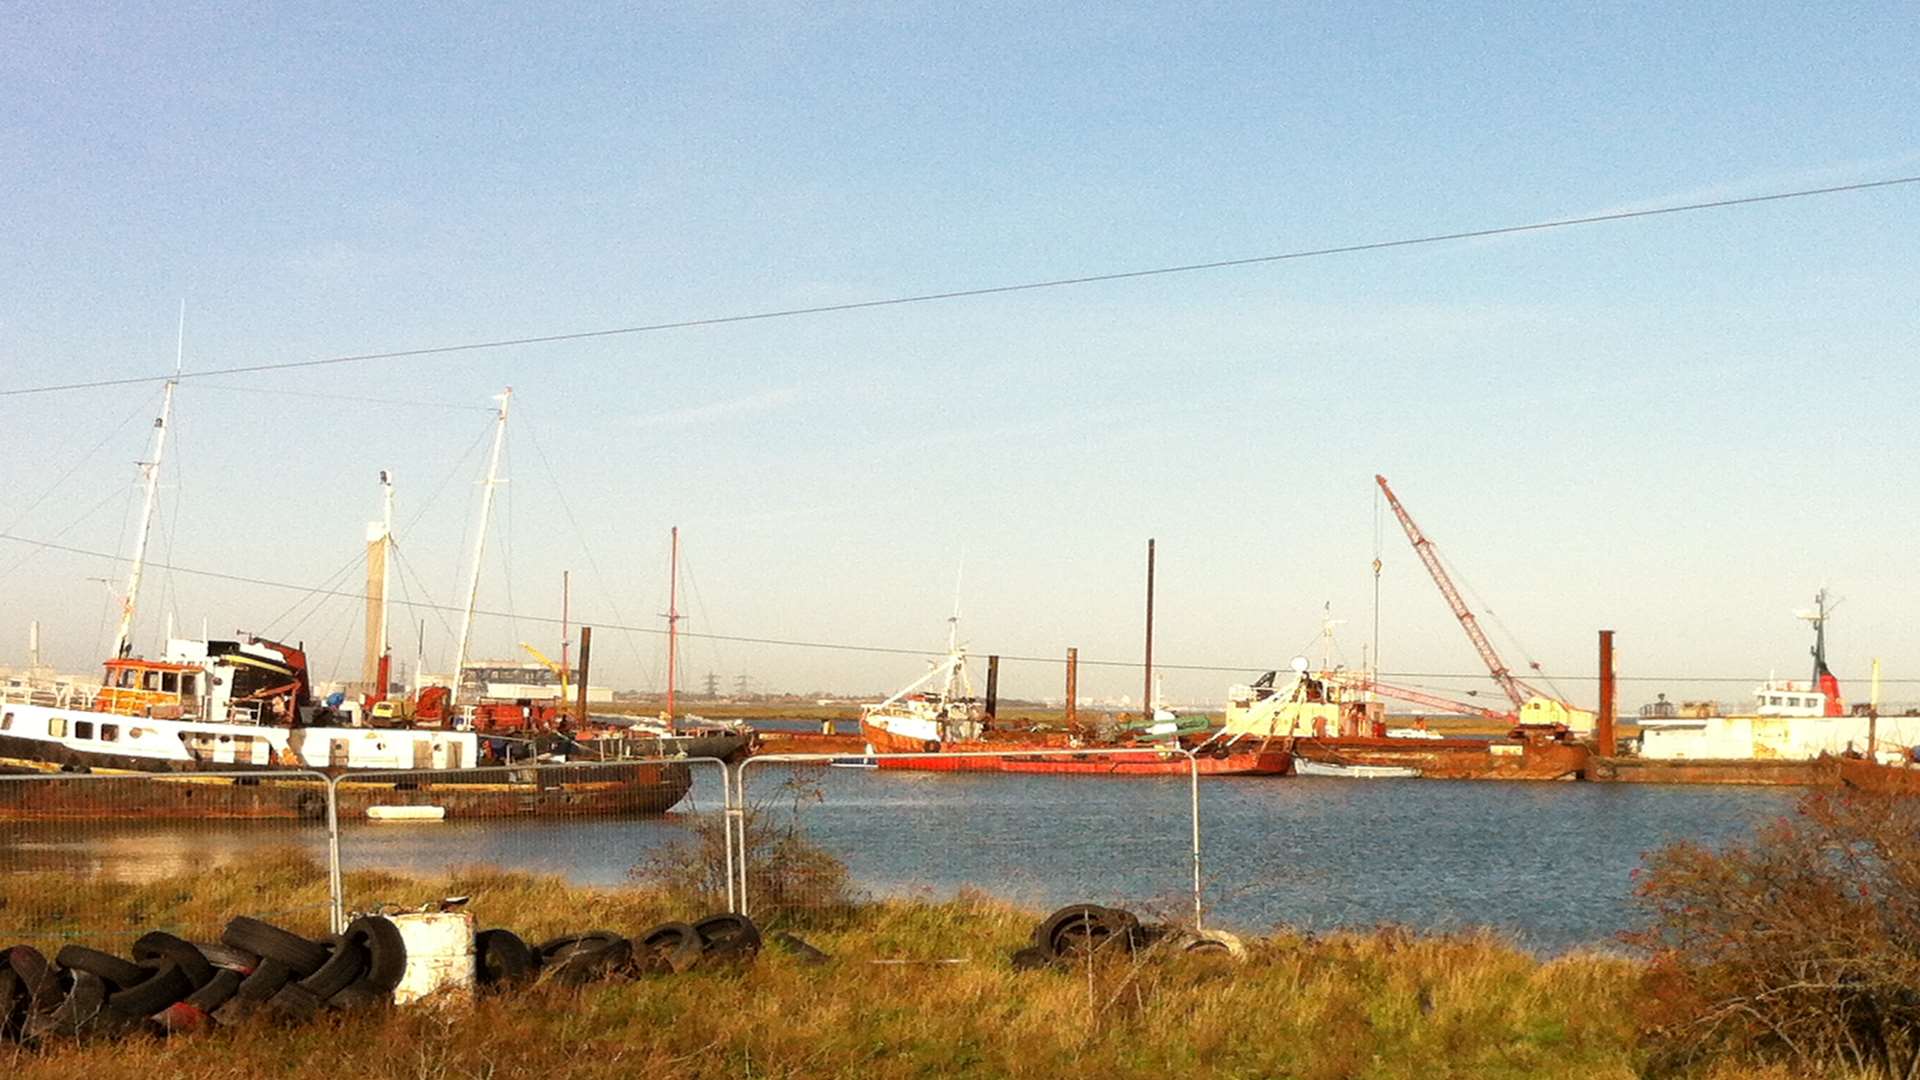 The boat was moored off Coal Washer Wharf, Queenborough